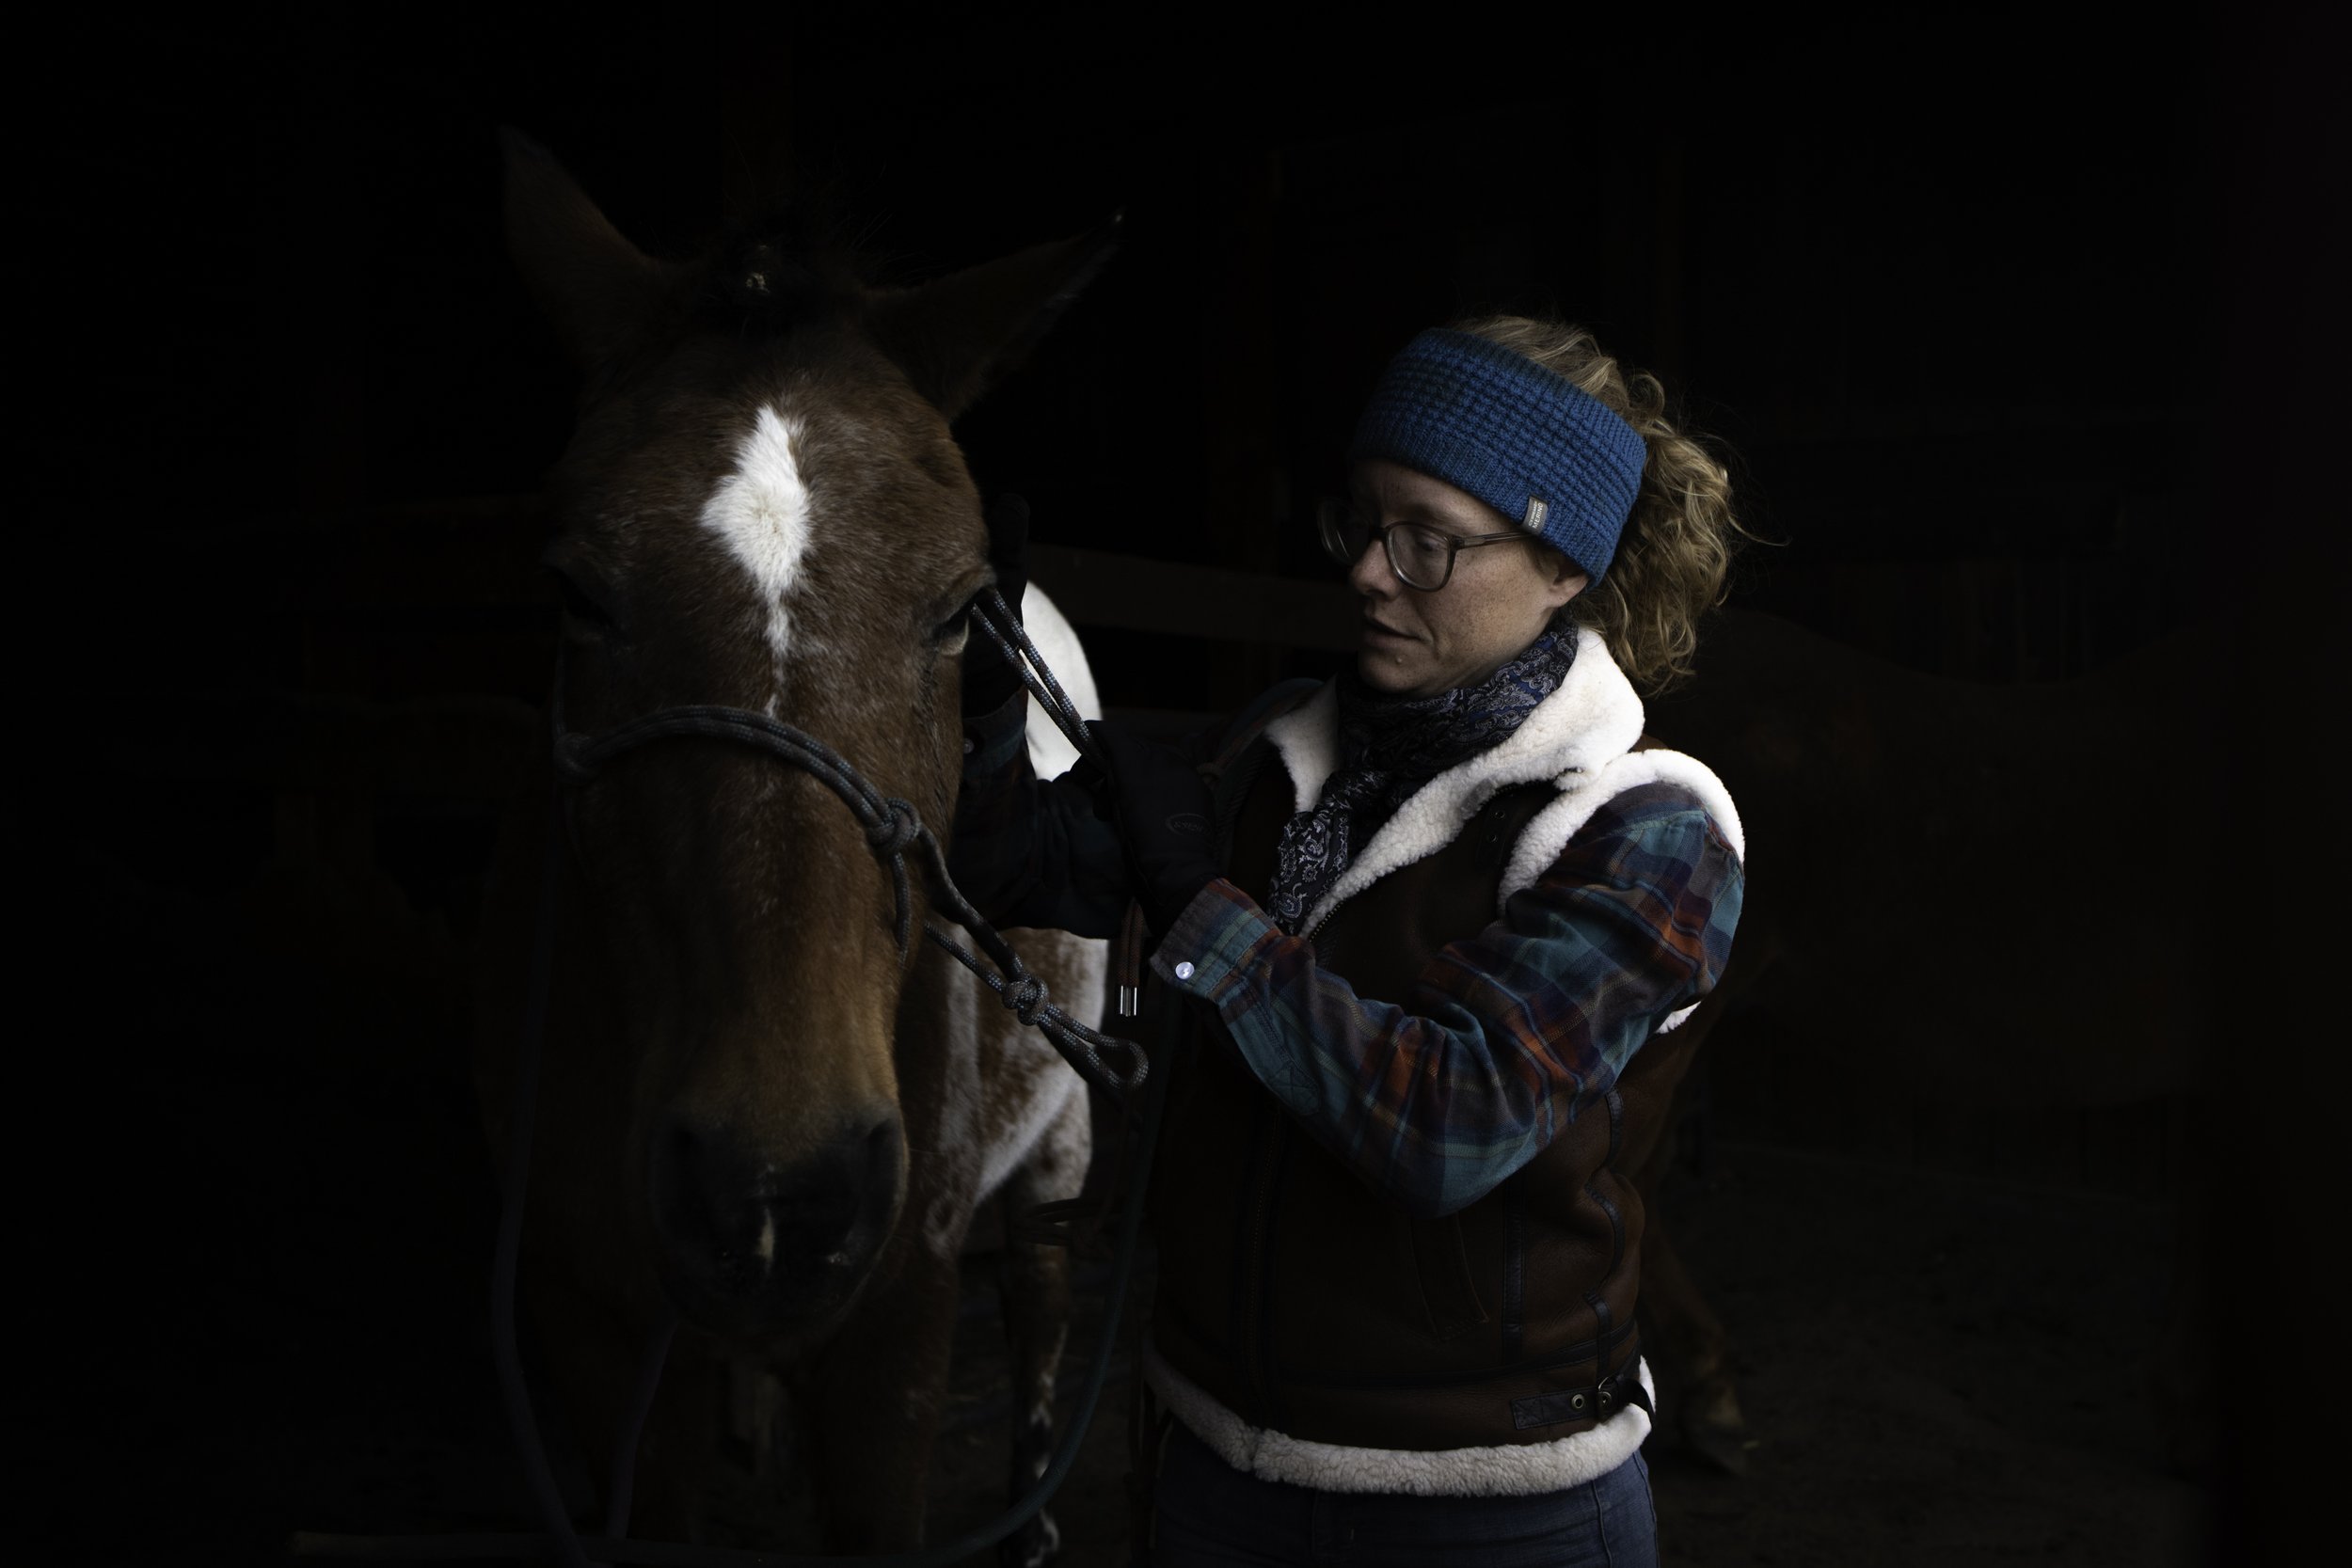  Jessica Seifert calmly strokes a horse in a stable before leading him to a trailer on Nov 15, 2022, at Philmont Scout Ranch in Cimarron, N.M. Seifert is often asked about her role as the only female ranch technician. “It doesn't make me feel like I'